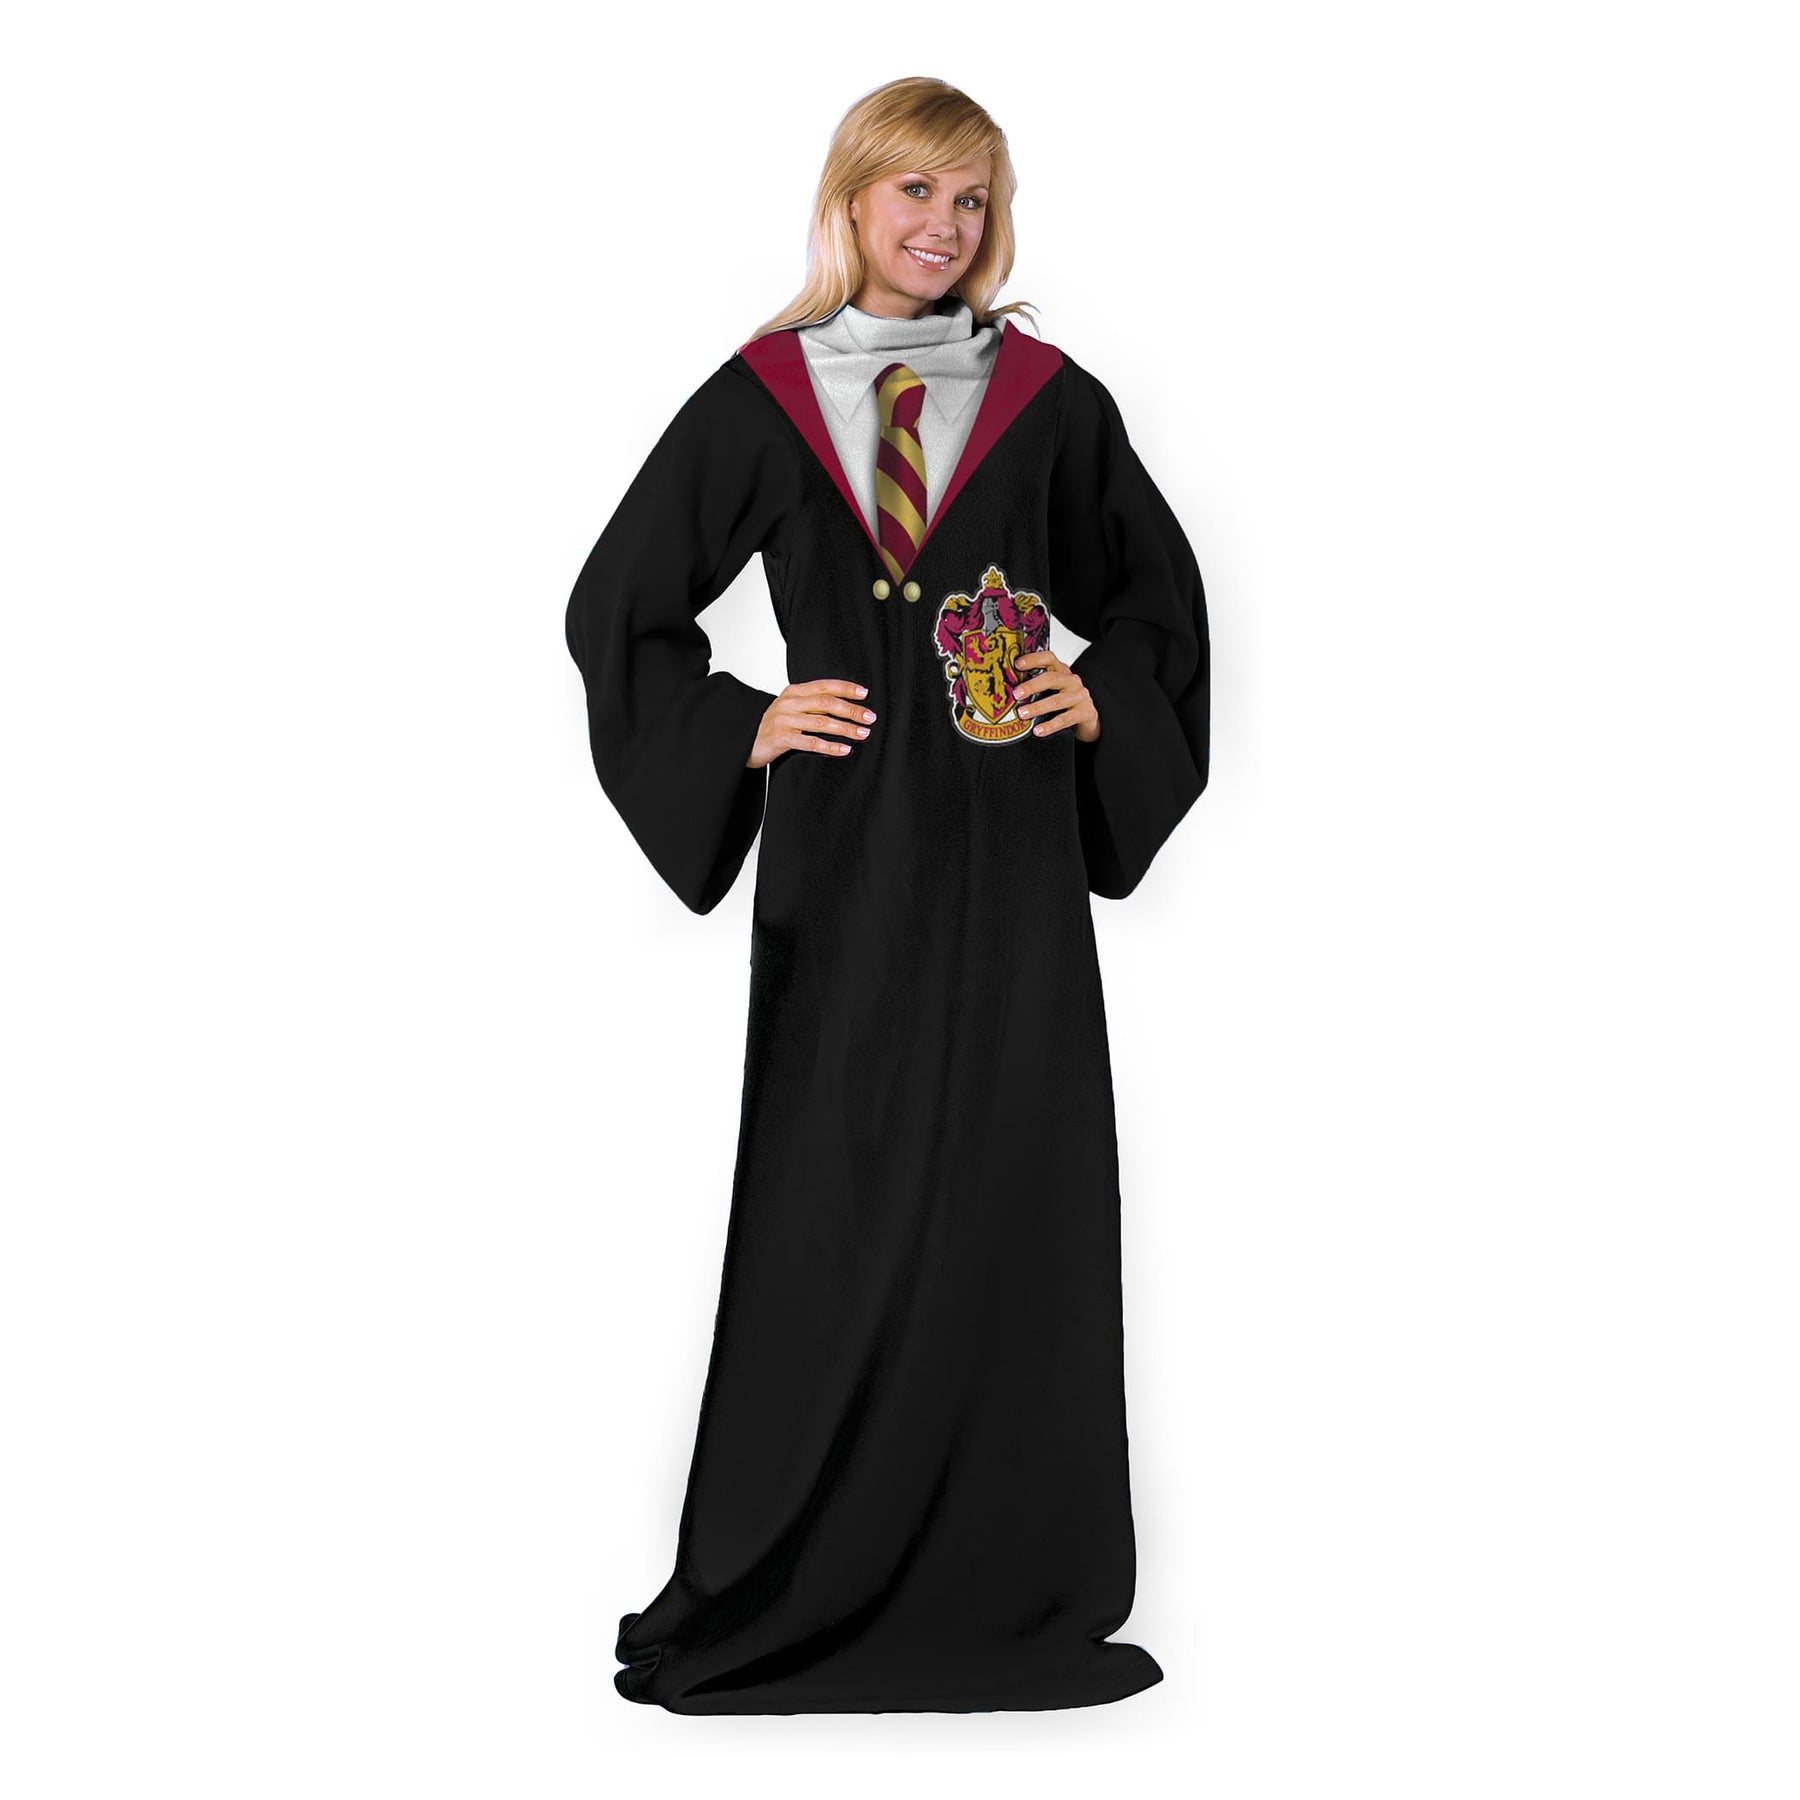 Harry Potter Hogwarts Rules Adult Silk Touch Comfy Throw With Sleeves